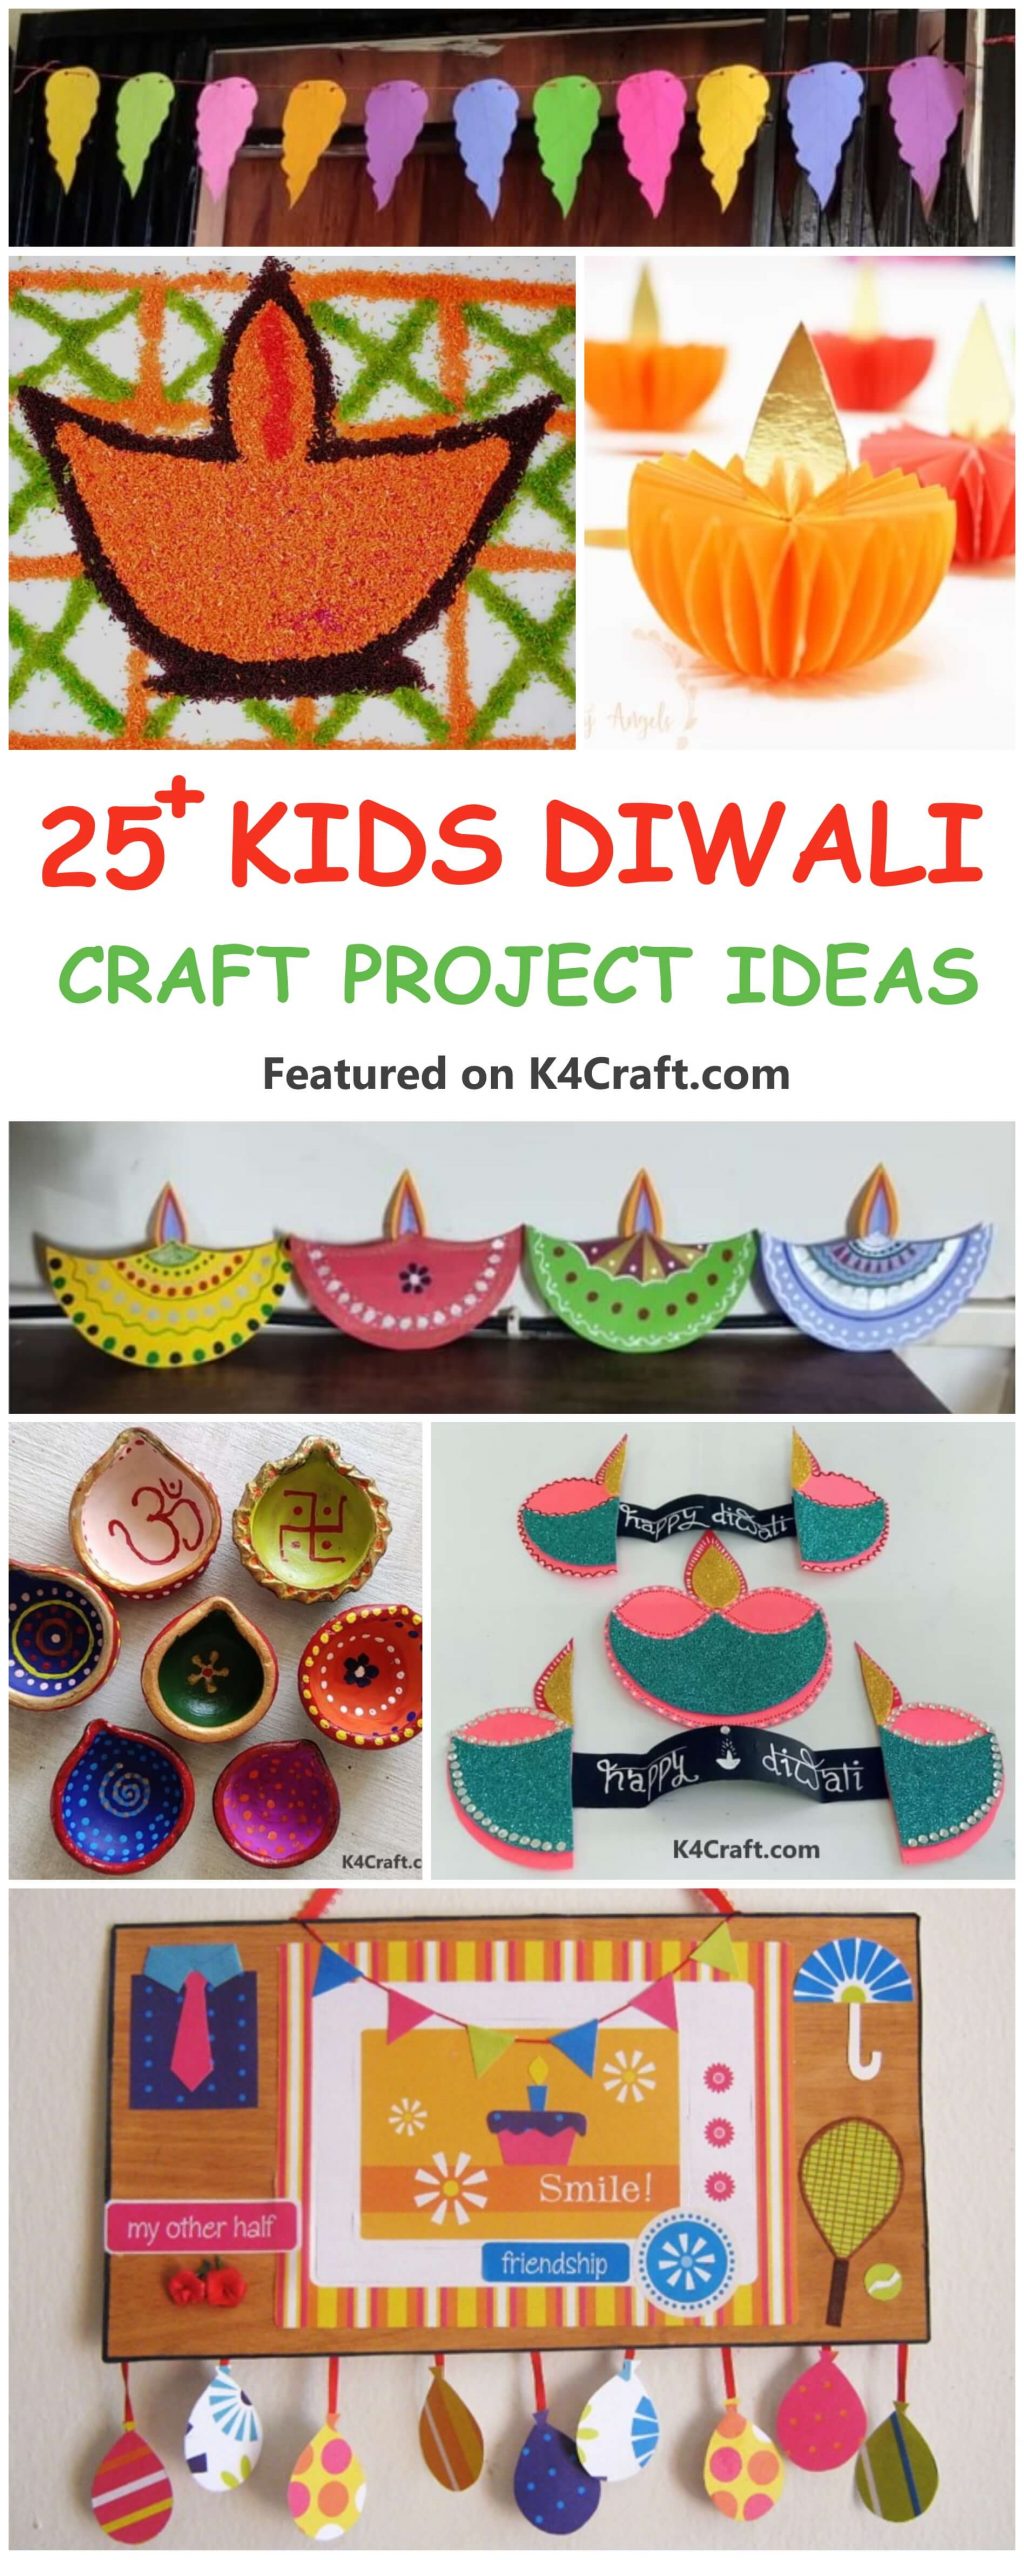 12 Easy & colourful Deepavali crafts for kids | HoneyKids Asia